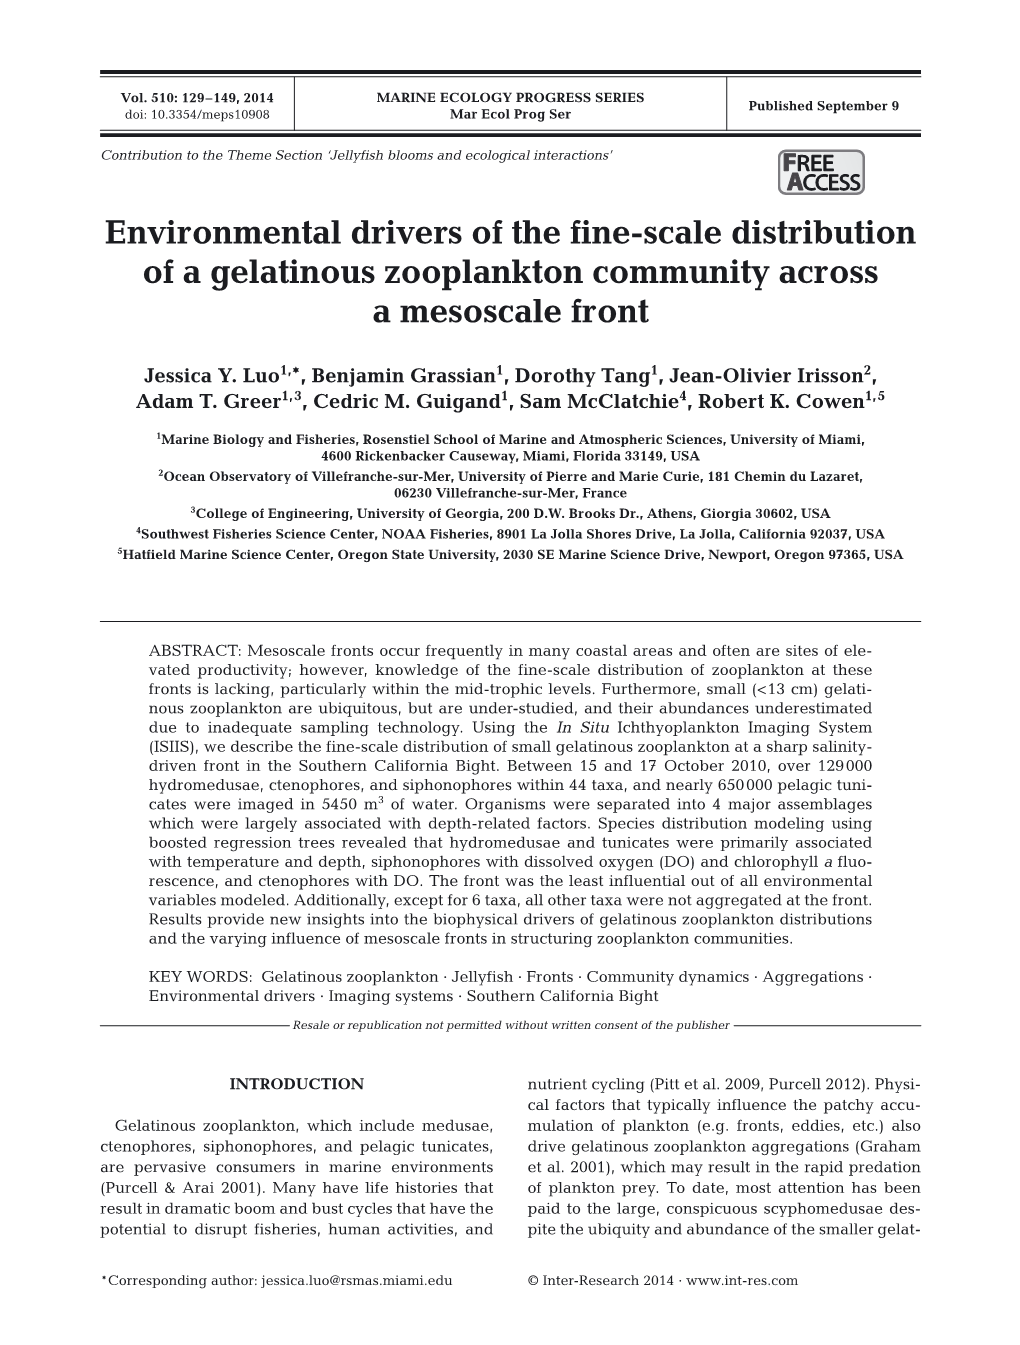 Environmental Drivers of the Fine-Scale Distribution of a Gelatinous Zooplankton Community Across a Mesoscale Front